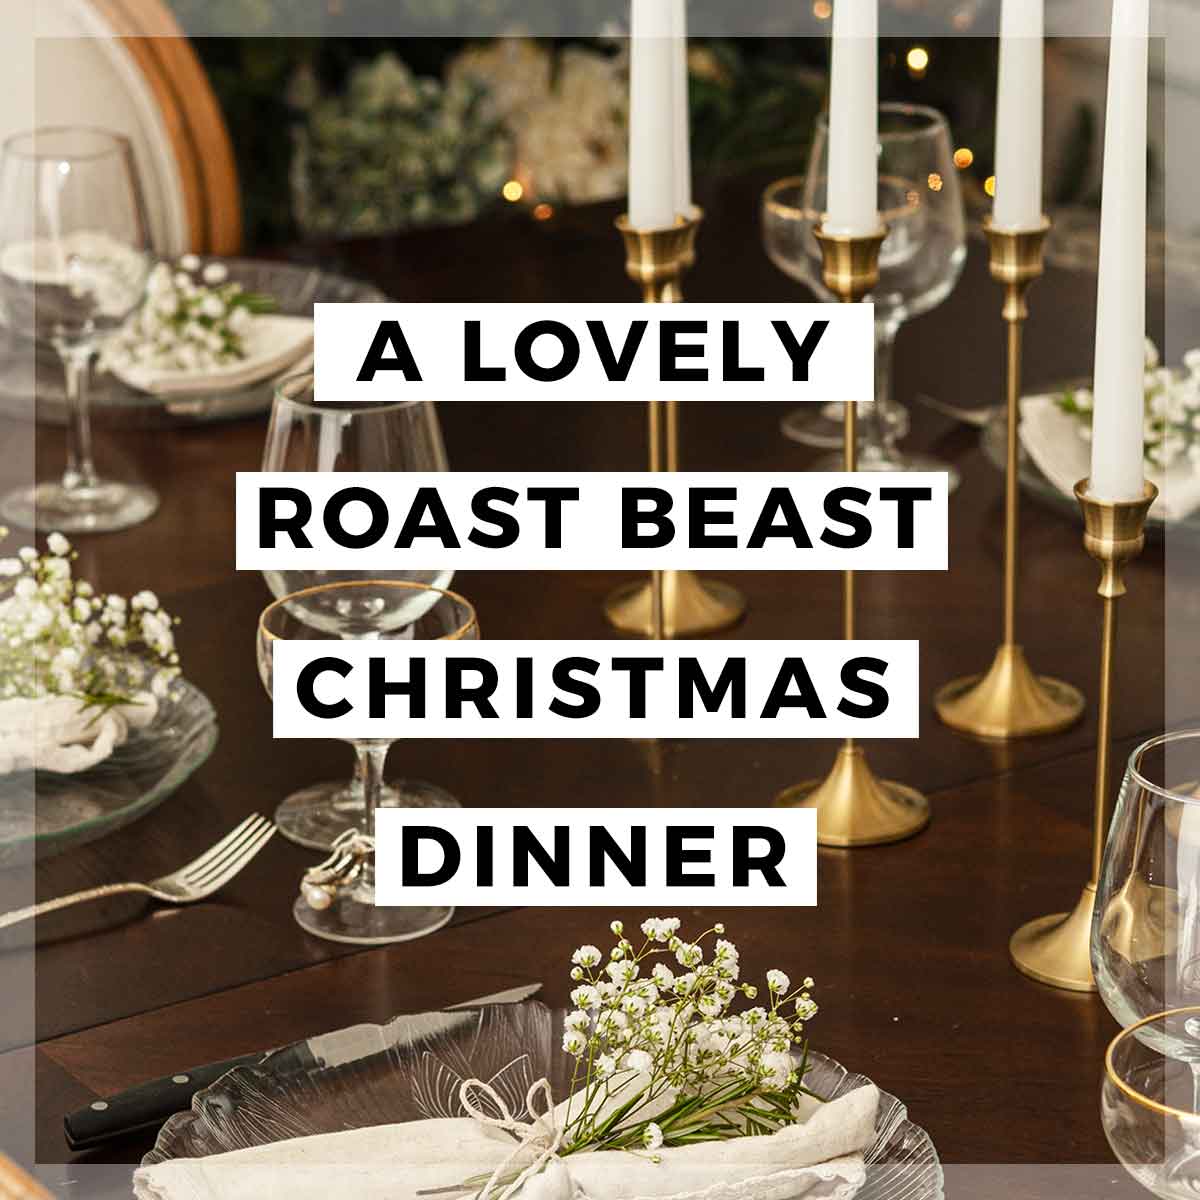 A Christmasy dinner table with a title that says "A Lovely Roast Beast Christmas Dinner."